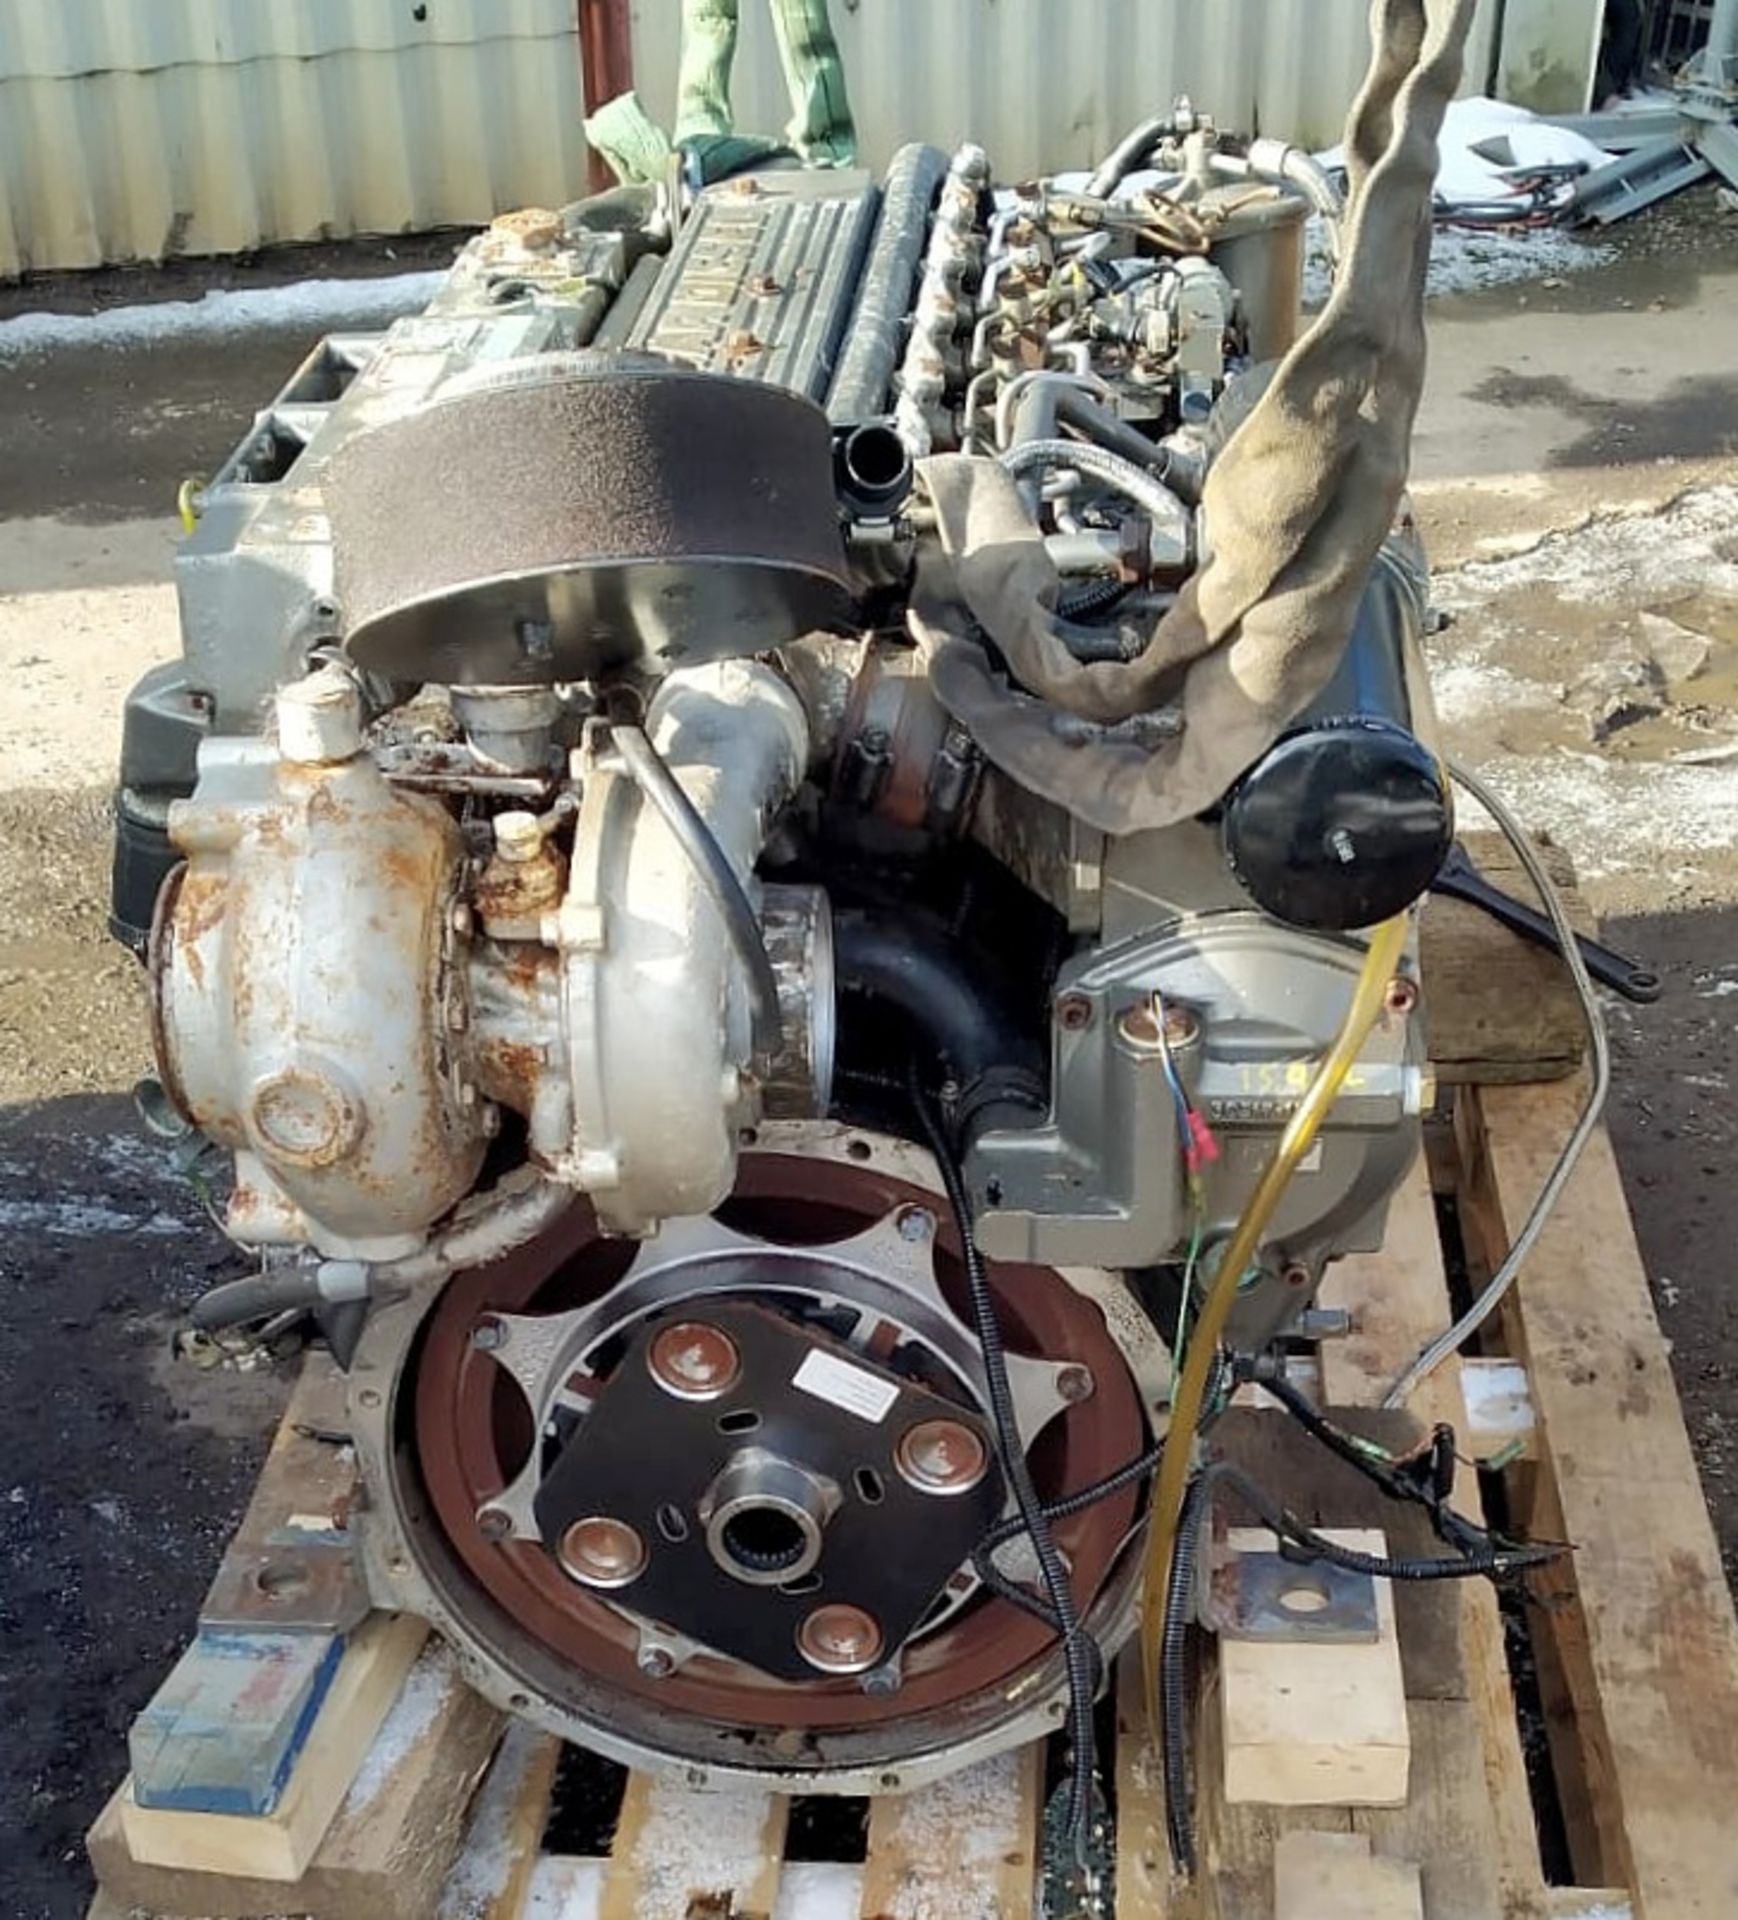 Yanmar RCD-6LY2X1 Diesel Boat Engine - 6LY2A-STP - 324kW (434HP) - possible coolant issue